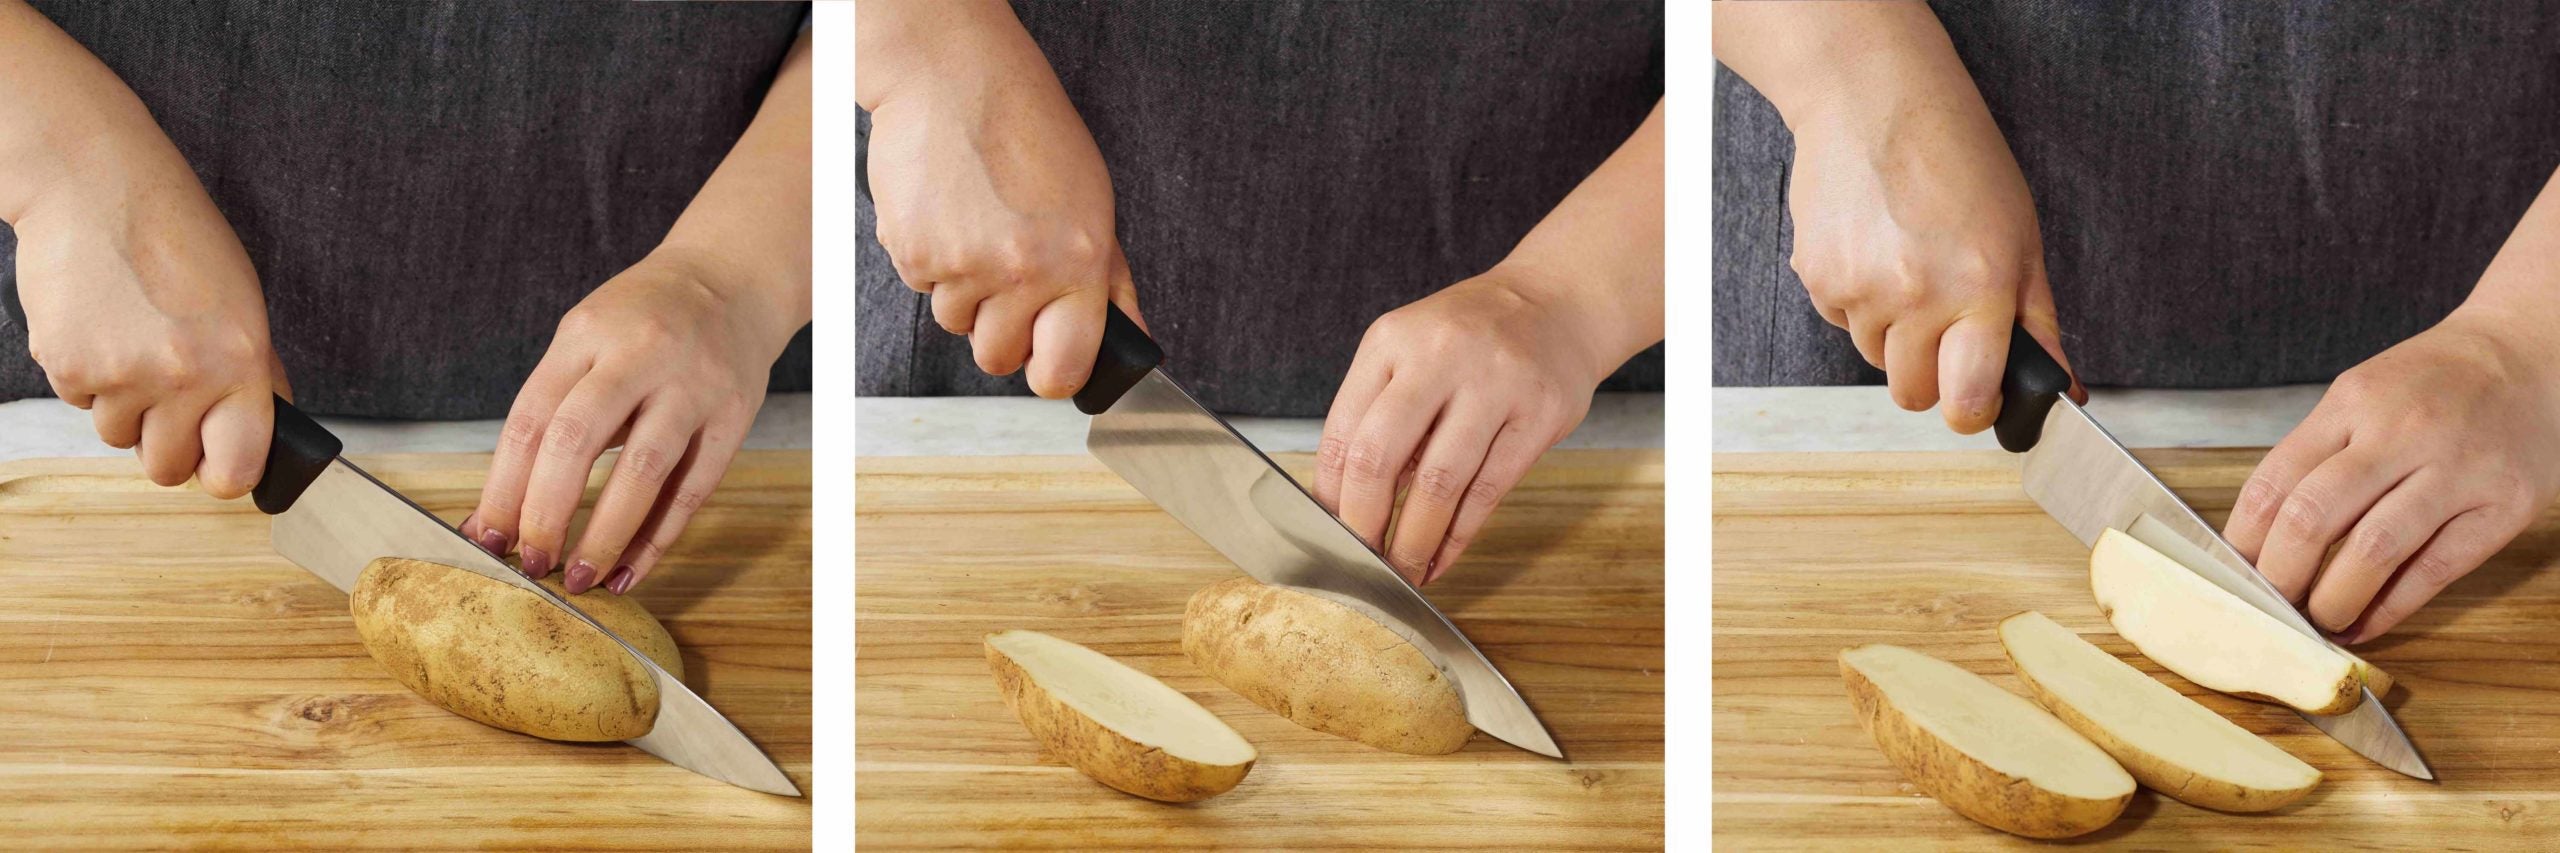 How to cut a potato into wedges, in three steps